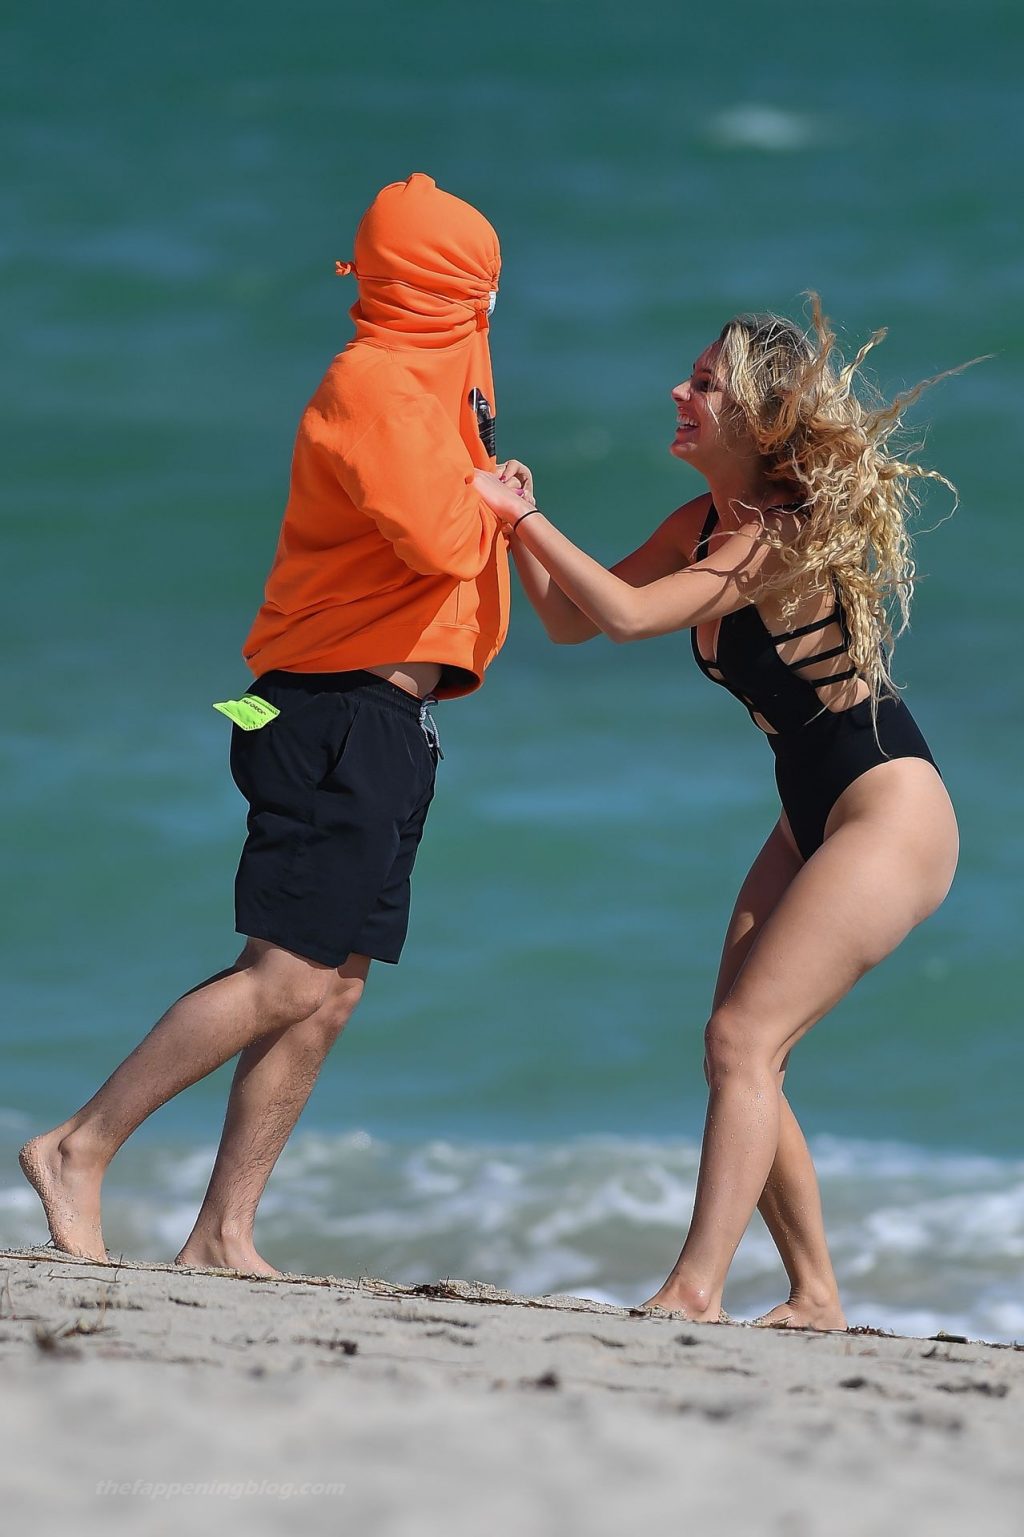 Lele Pons Shows Off Her Butt in a Black Swimsuit in Miami Beach (45 Photos)